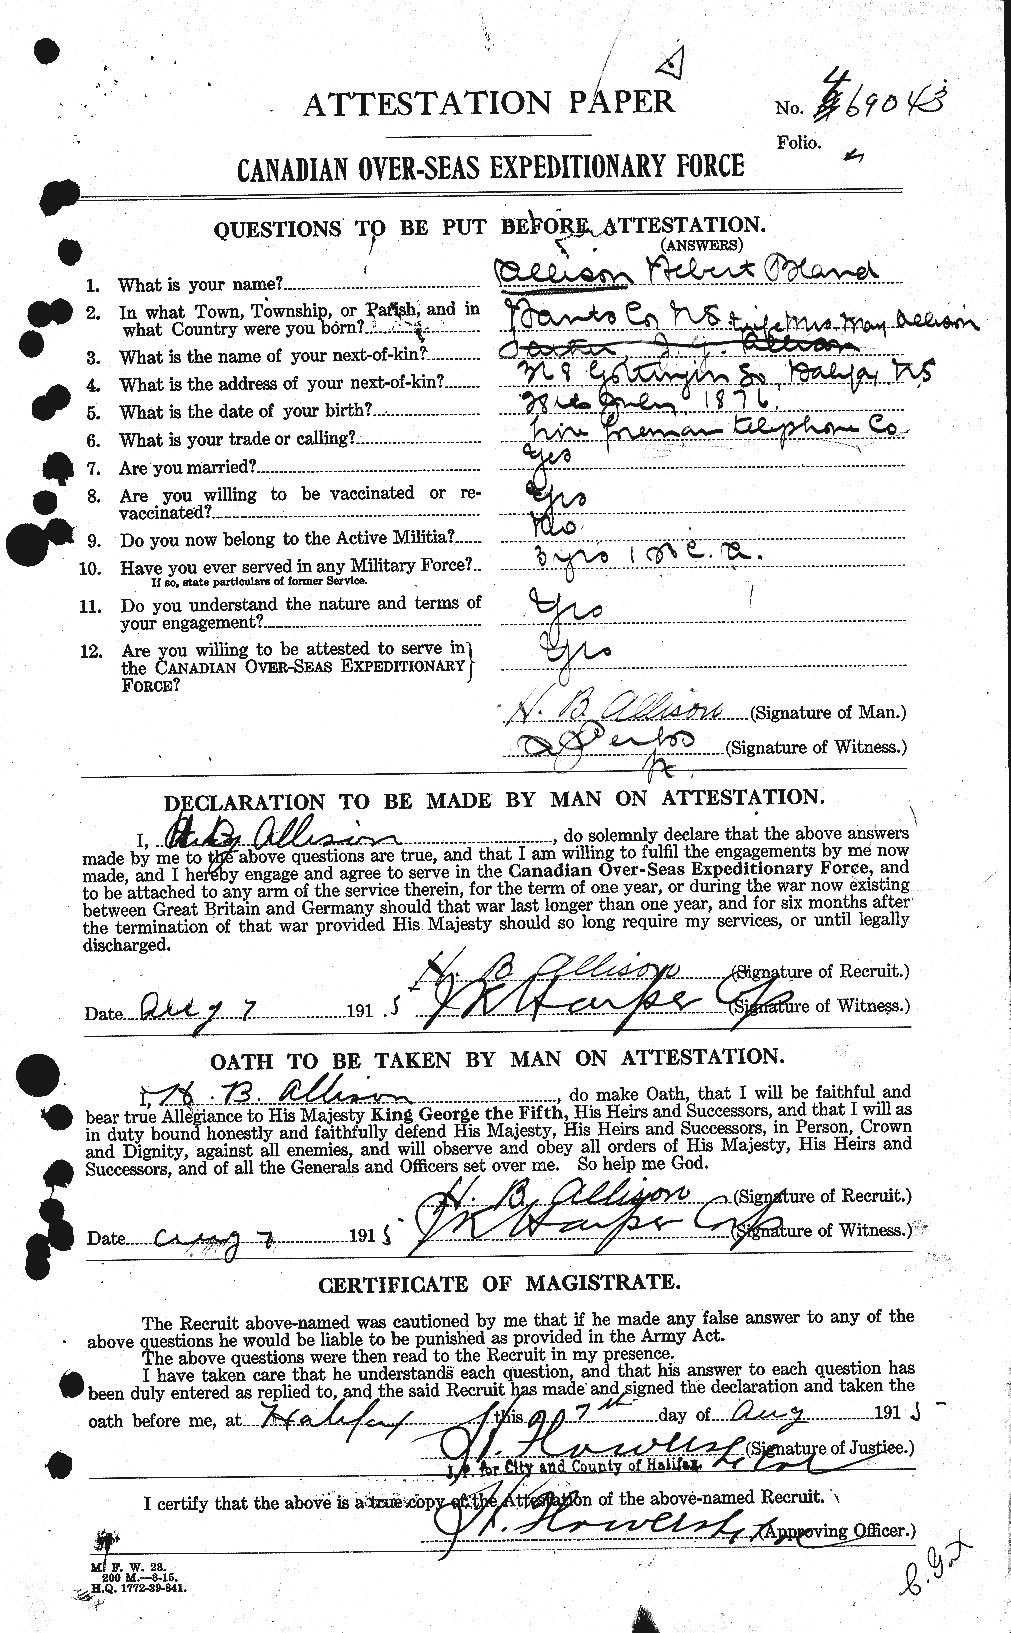 Personnel Records of the First World War - CEF 206612a